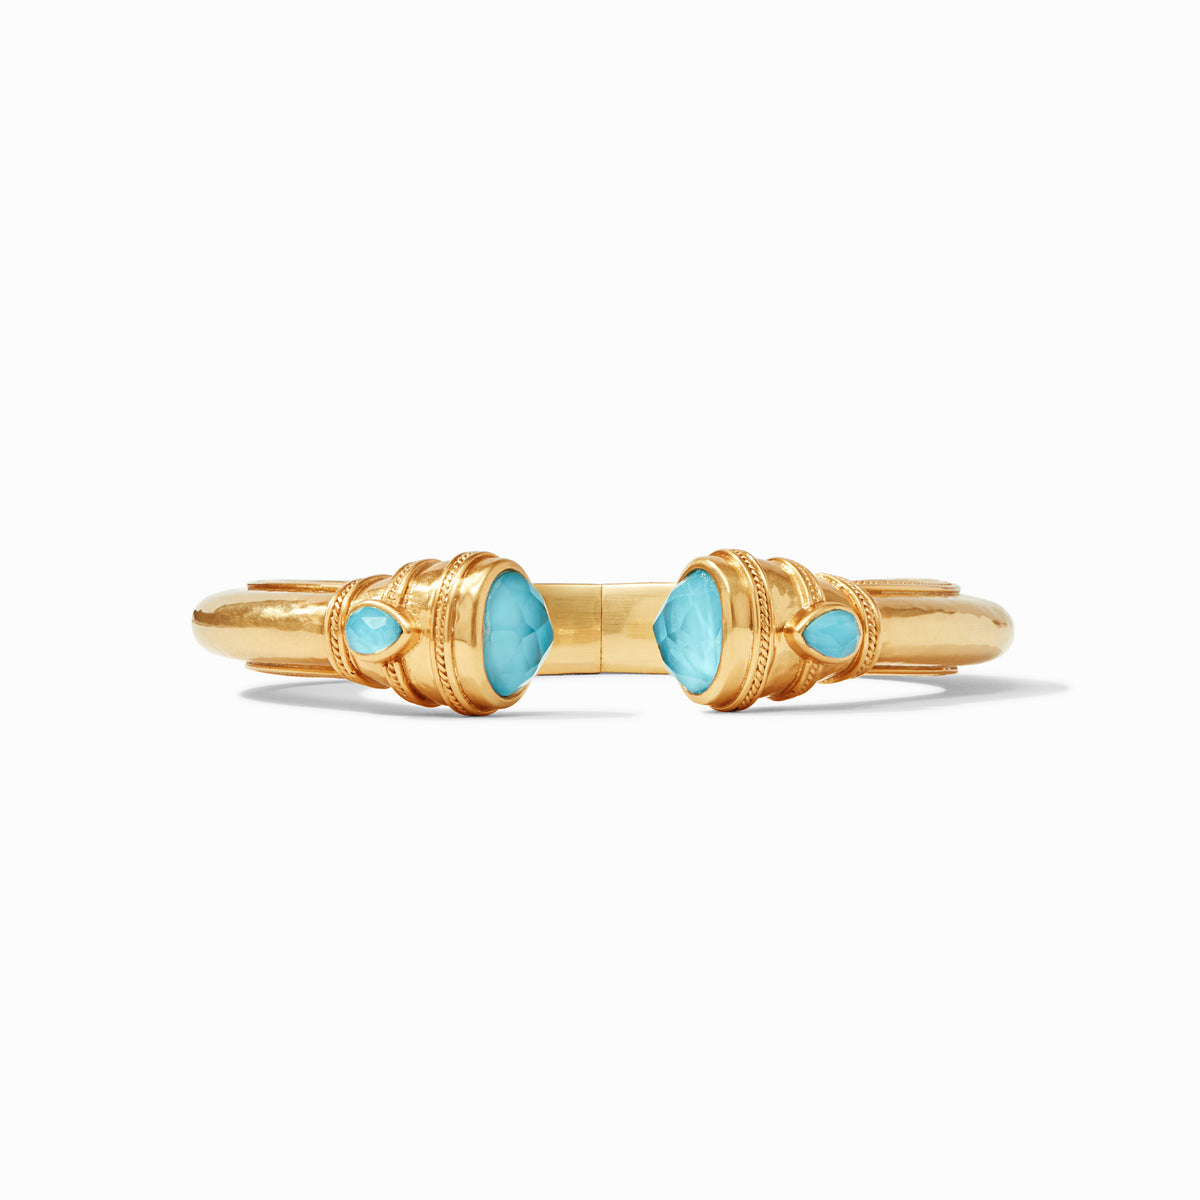 Cassis, a Julie Vos Hinge Cuff bracelet in the Iridescent Pacific Blue option